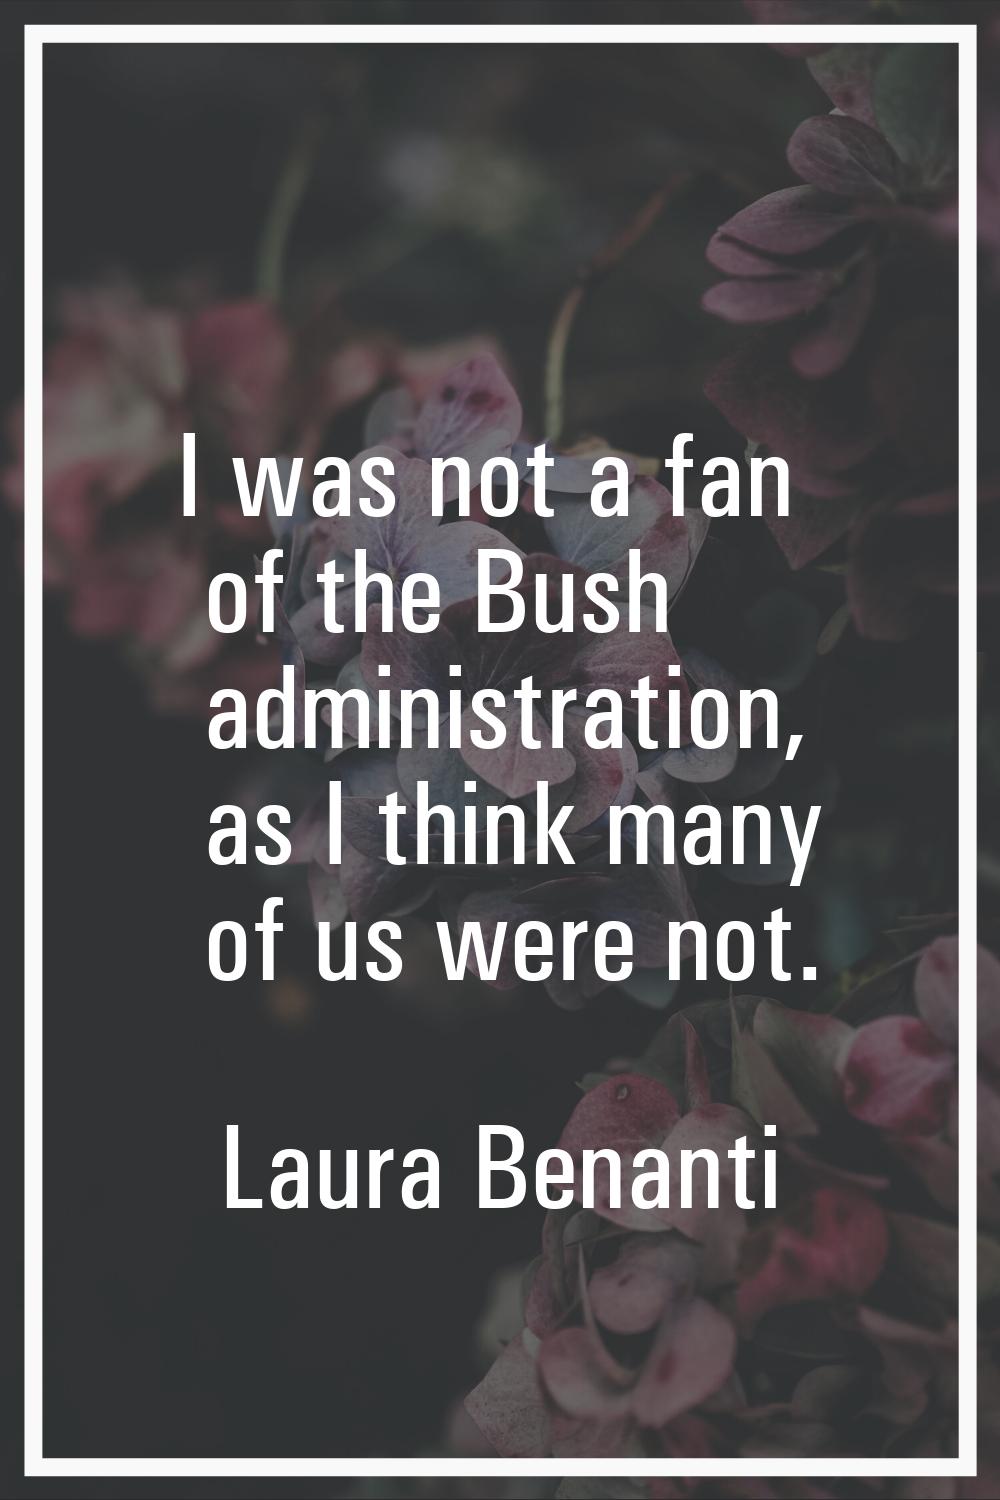 I was not a fan of the Bush administration, as I think many of us were not.